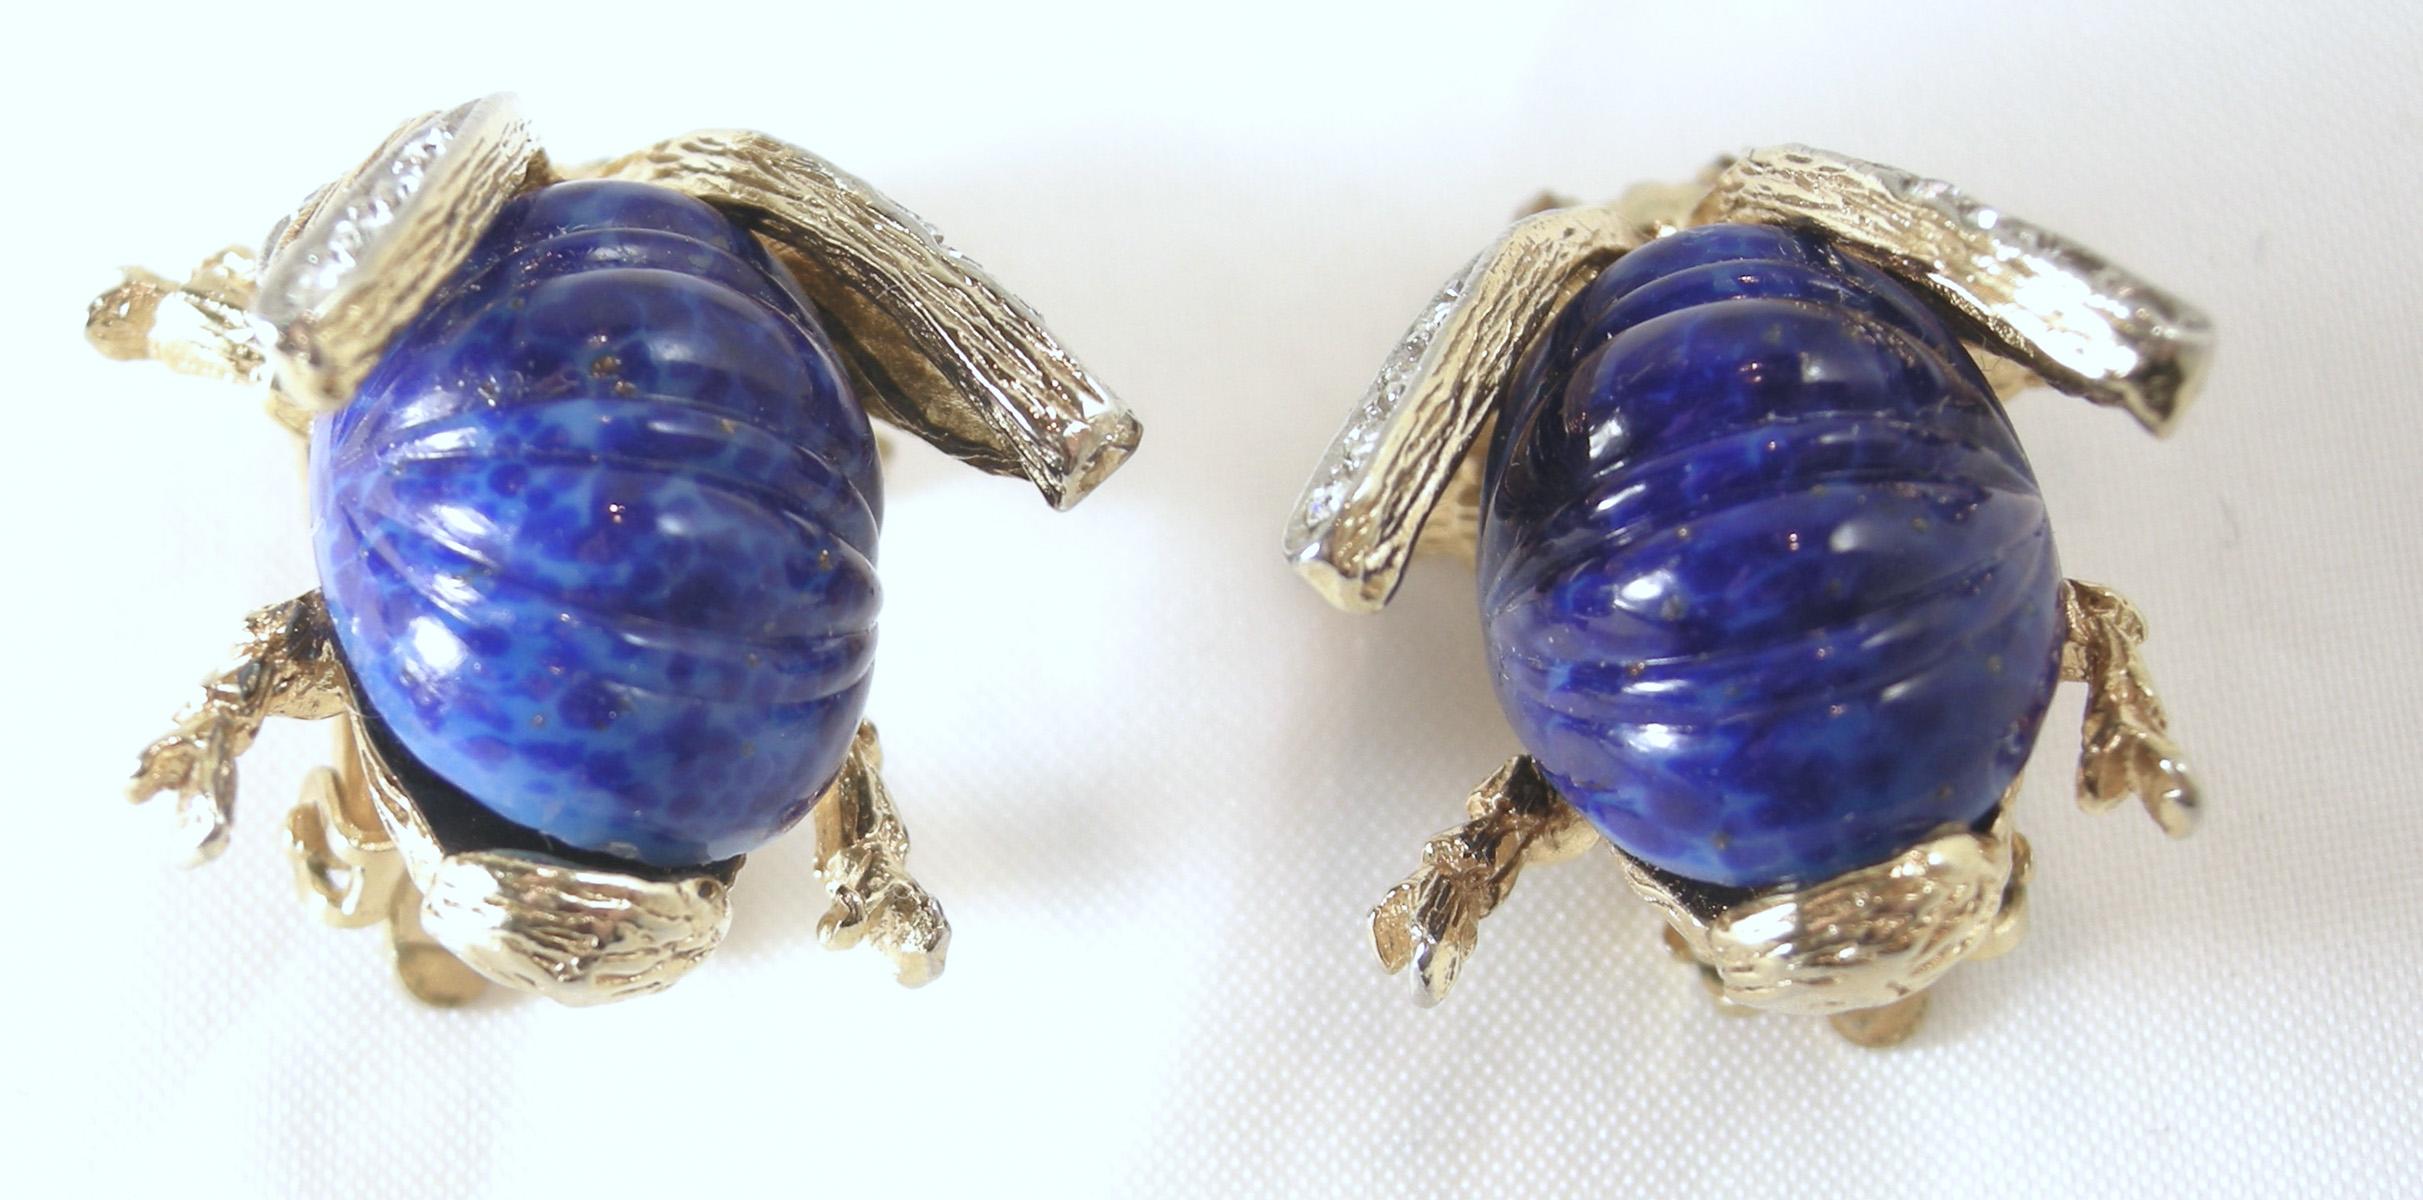 These wonderful bee clip earrings are unusual because the main body has blue melon stones with rhinestone accented on the wings and eyes … in a gold tone setting.  The inside of the clip has the patent number “3159894” and measures 1-1/4” long x